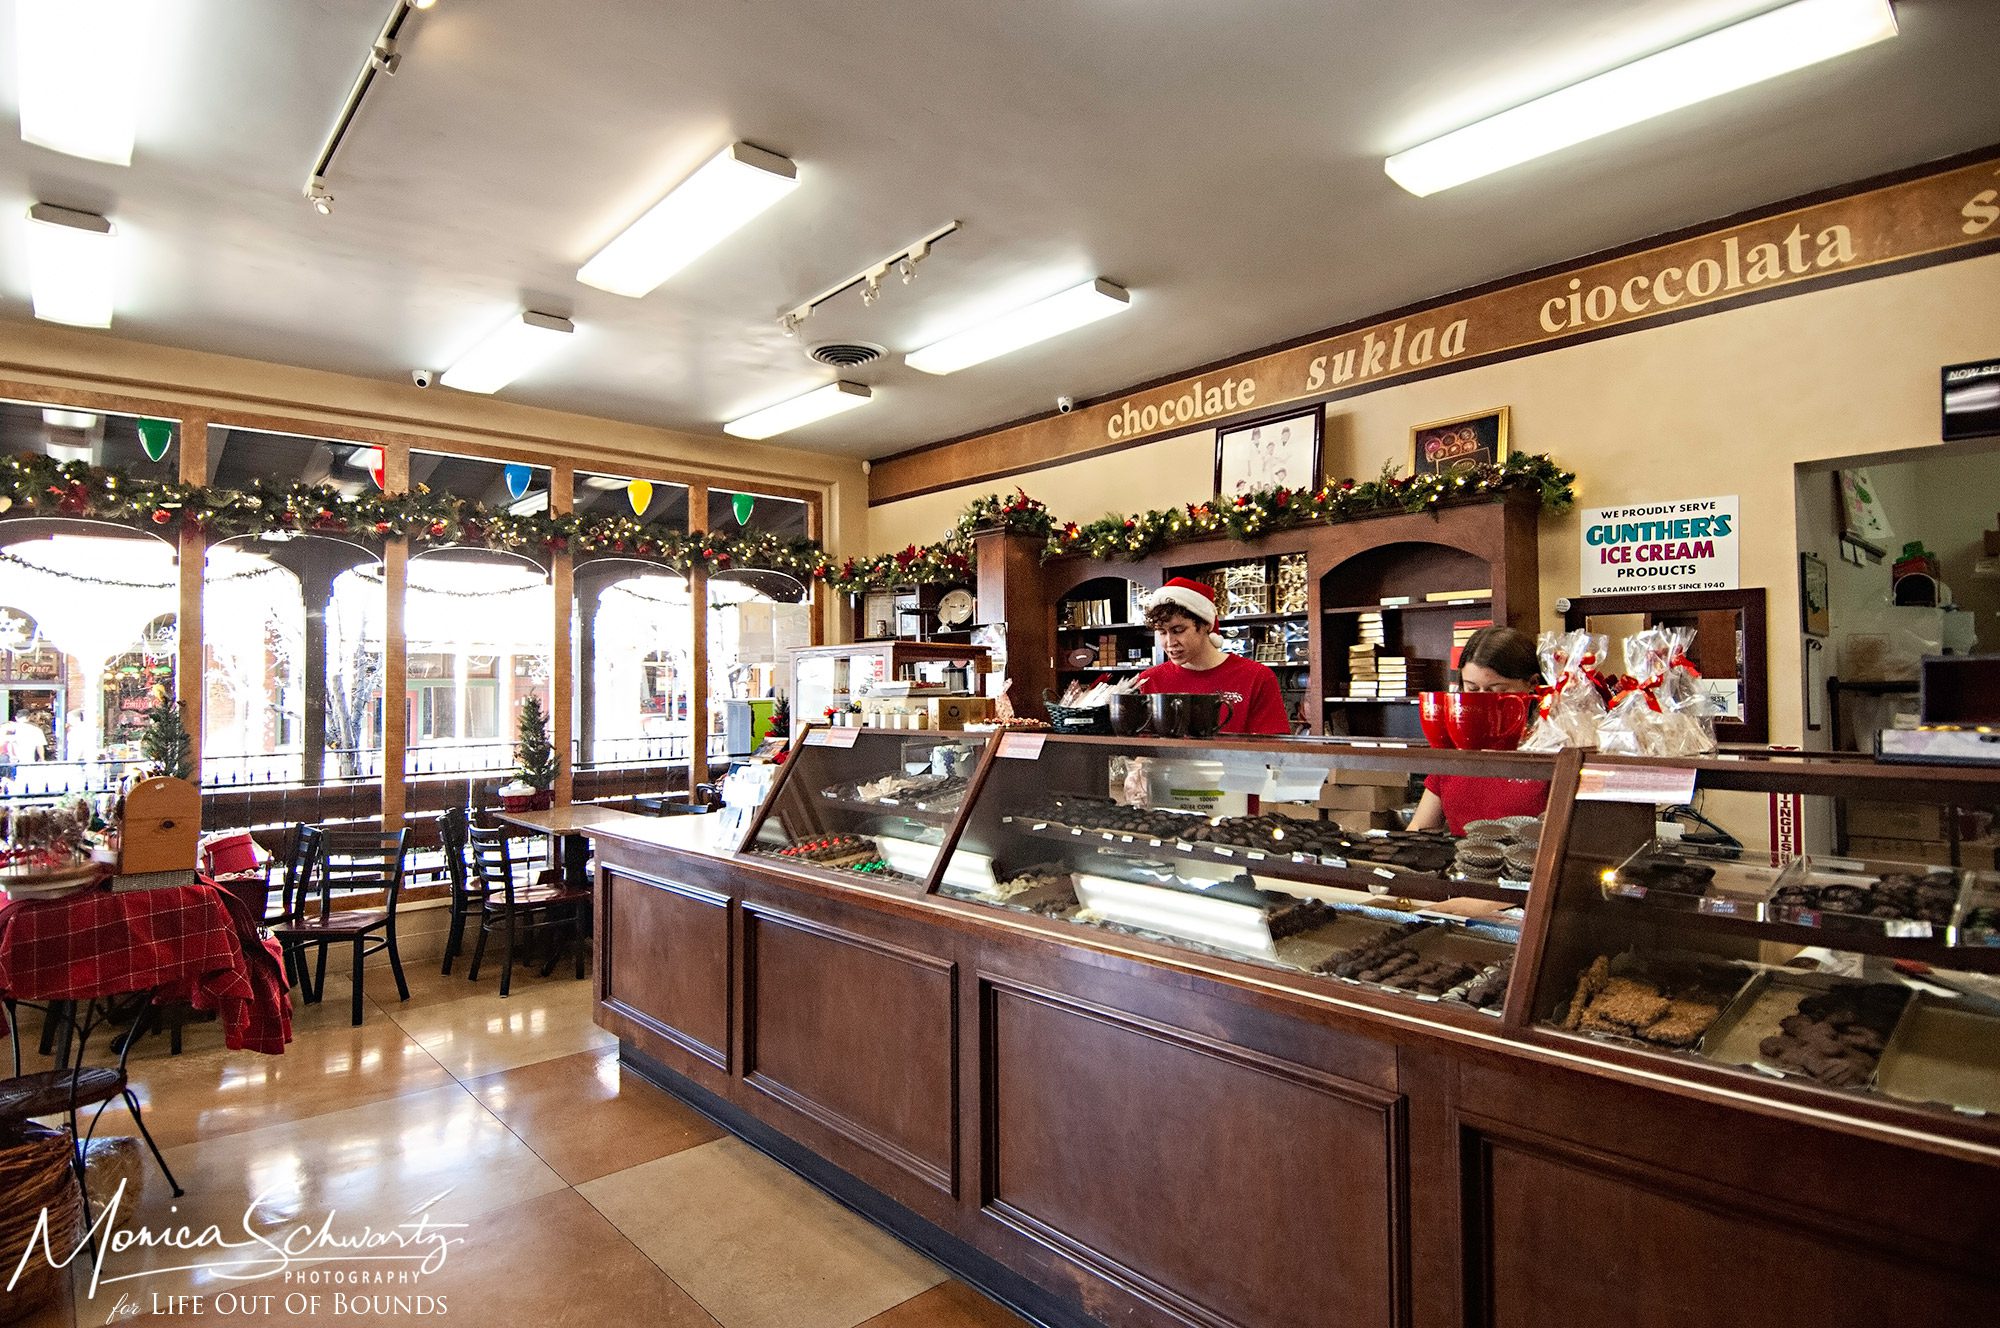 Snooks-chocolate-and-candy-shop-in-Folsom-California